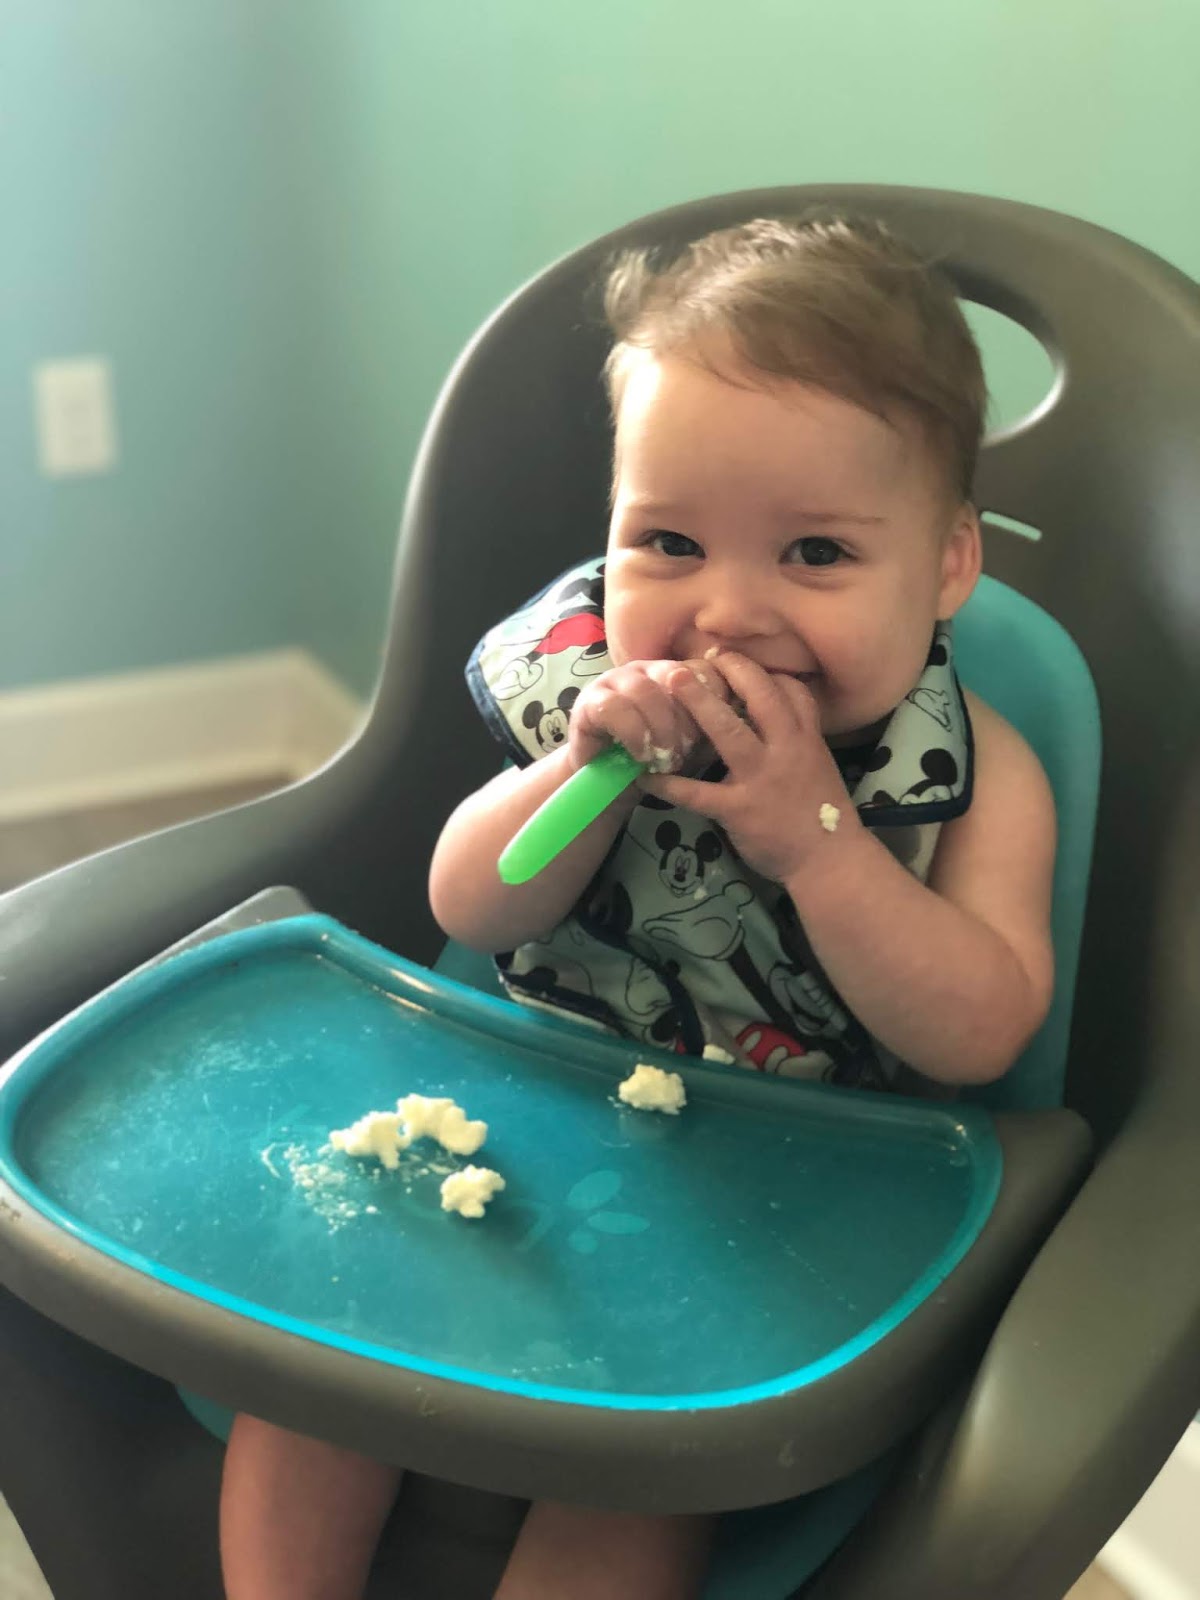 best foods baby led weaning 30 first foods